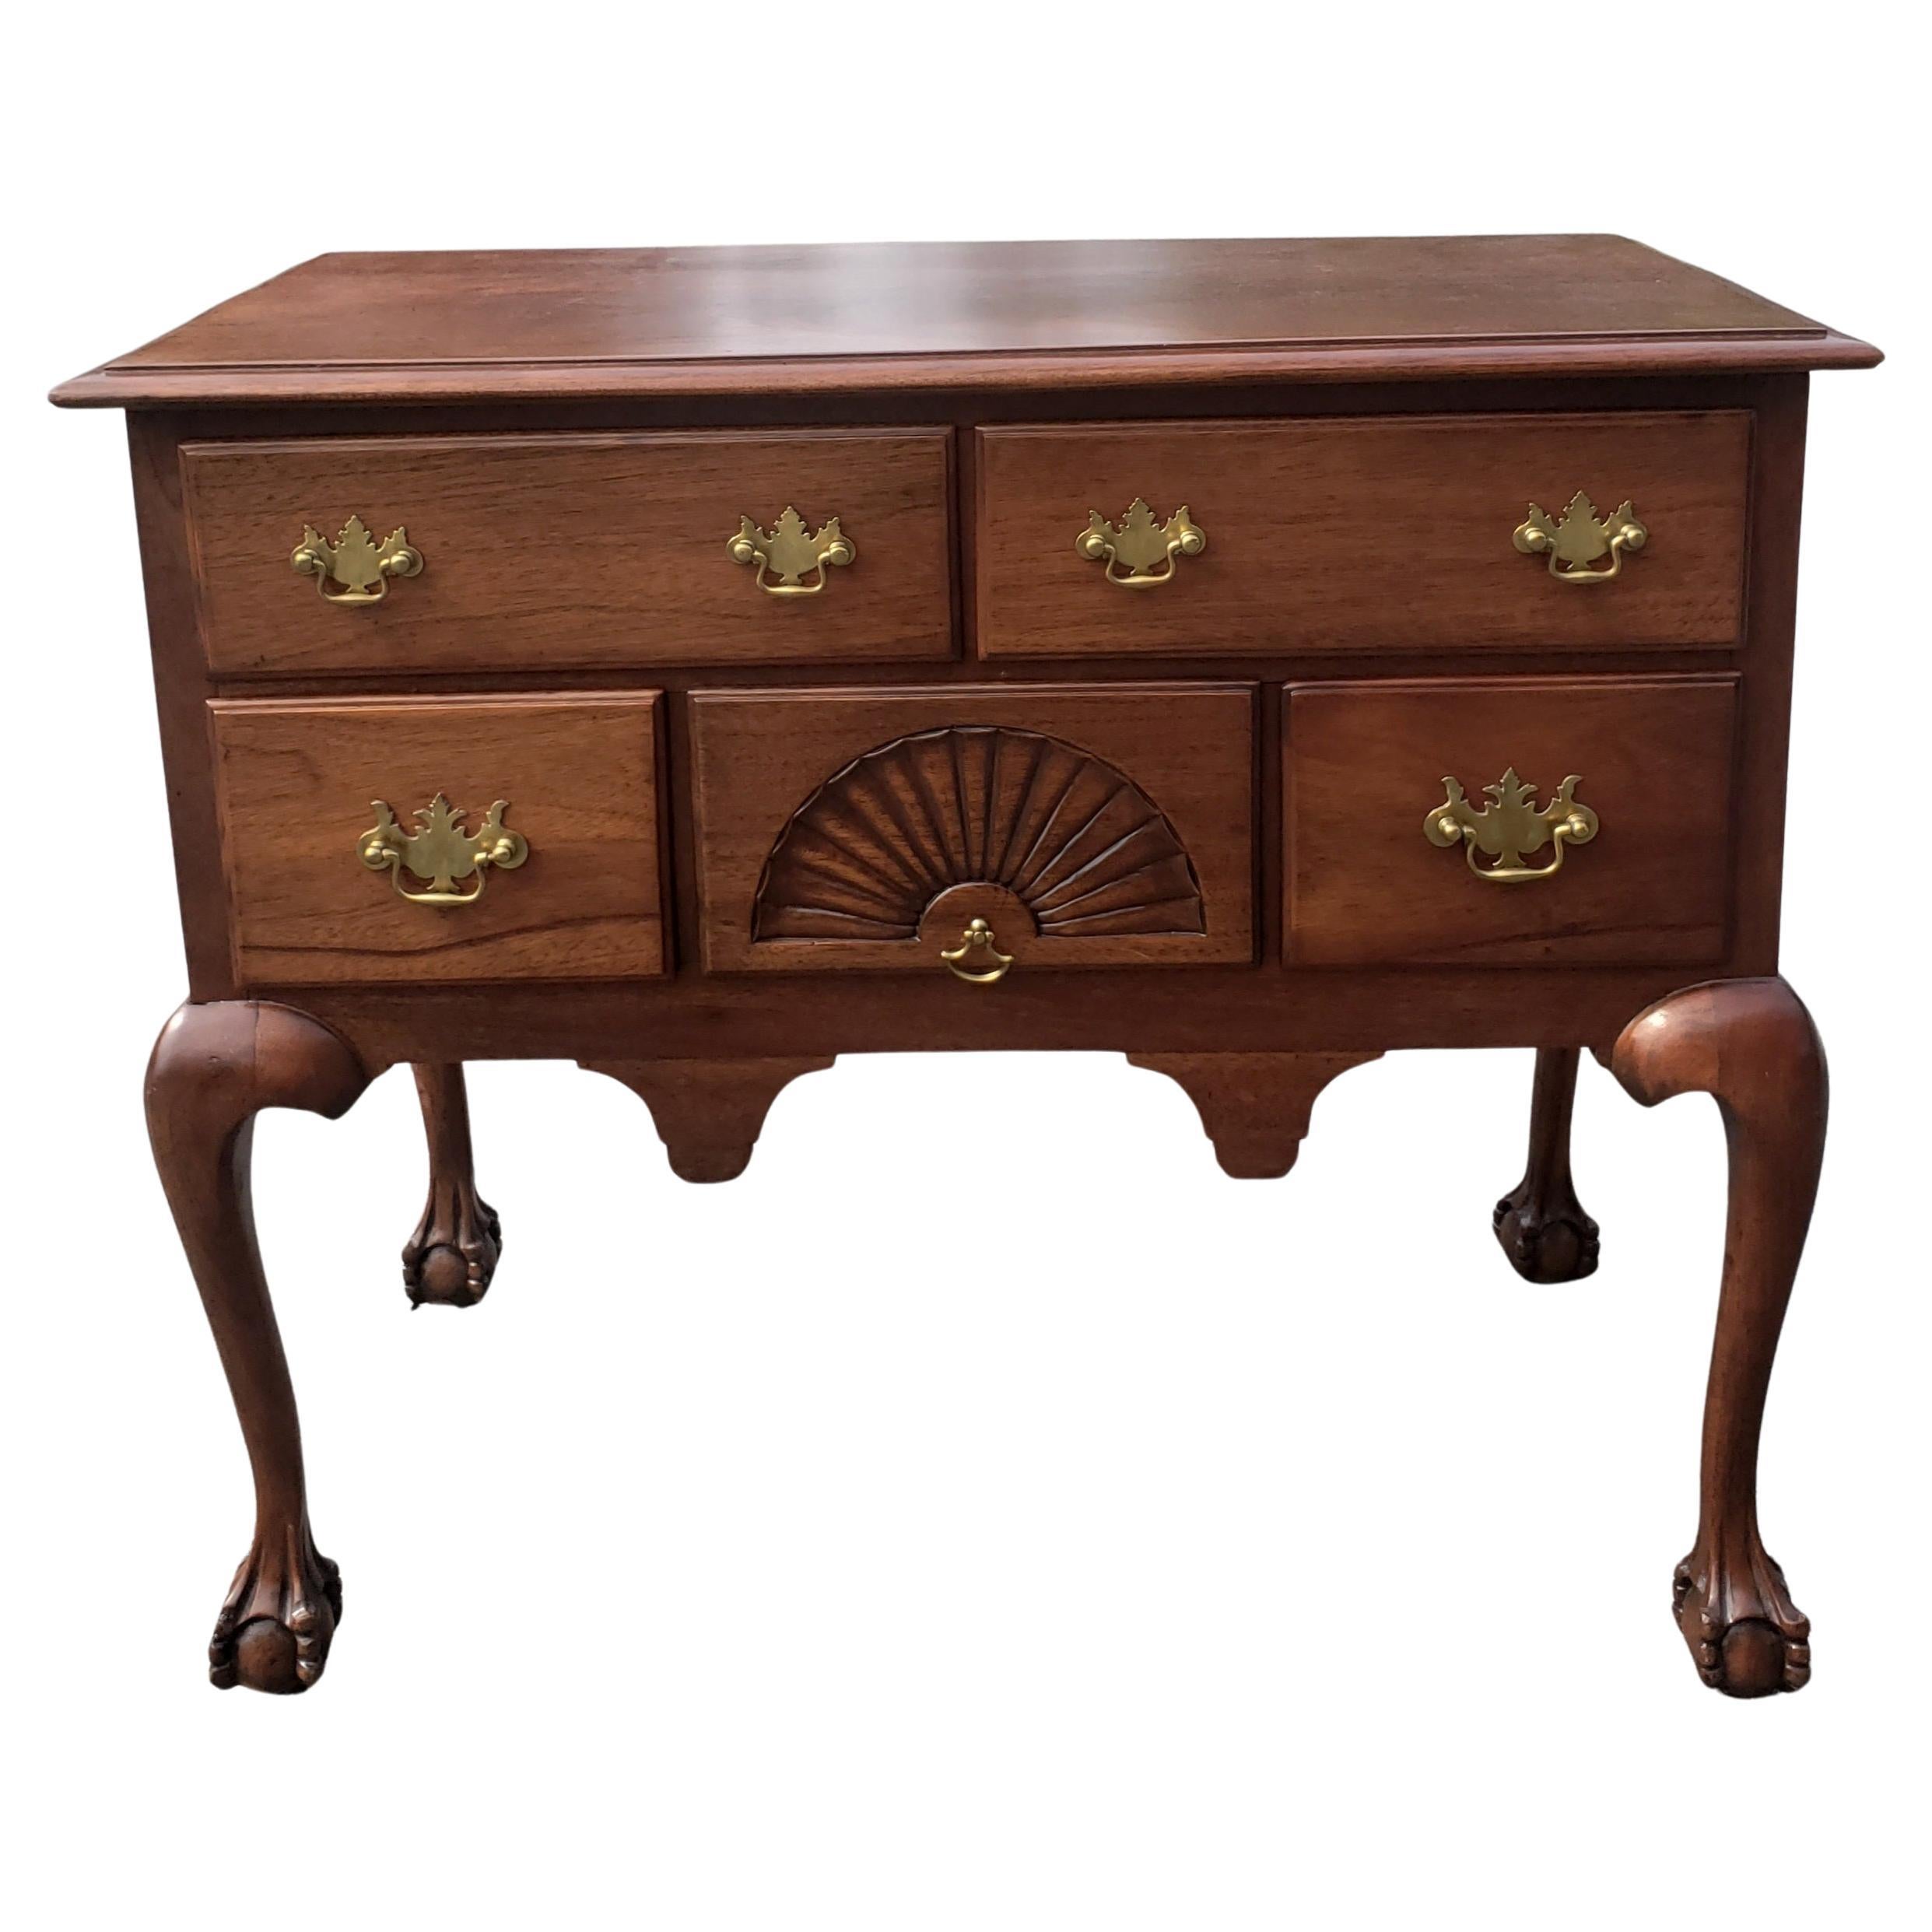 Late 19th Century Chippendale Mahogany Lowboy with Ball and Claw Feet For Sale